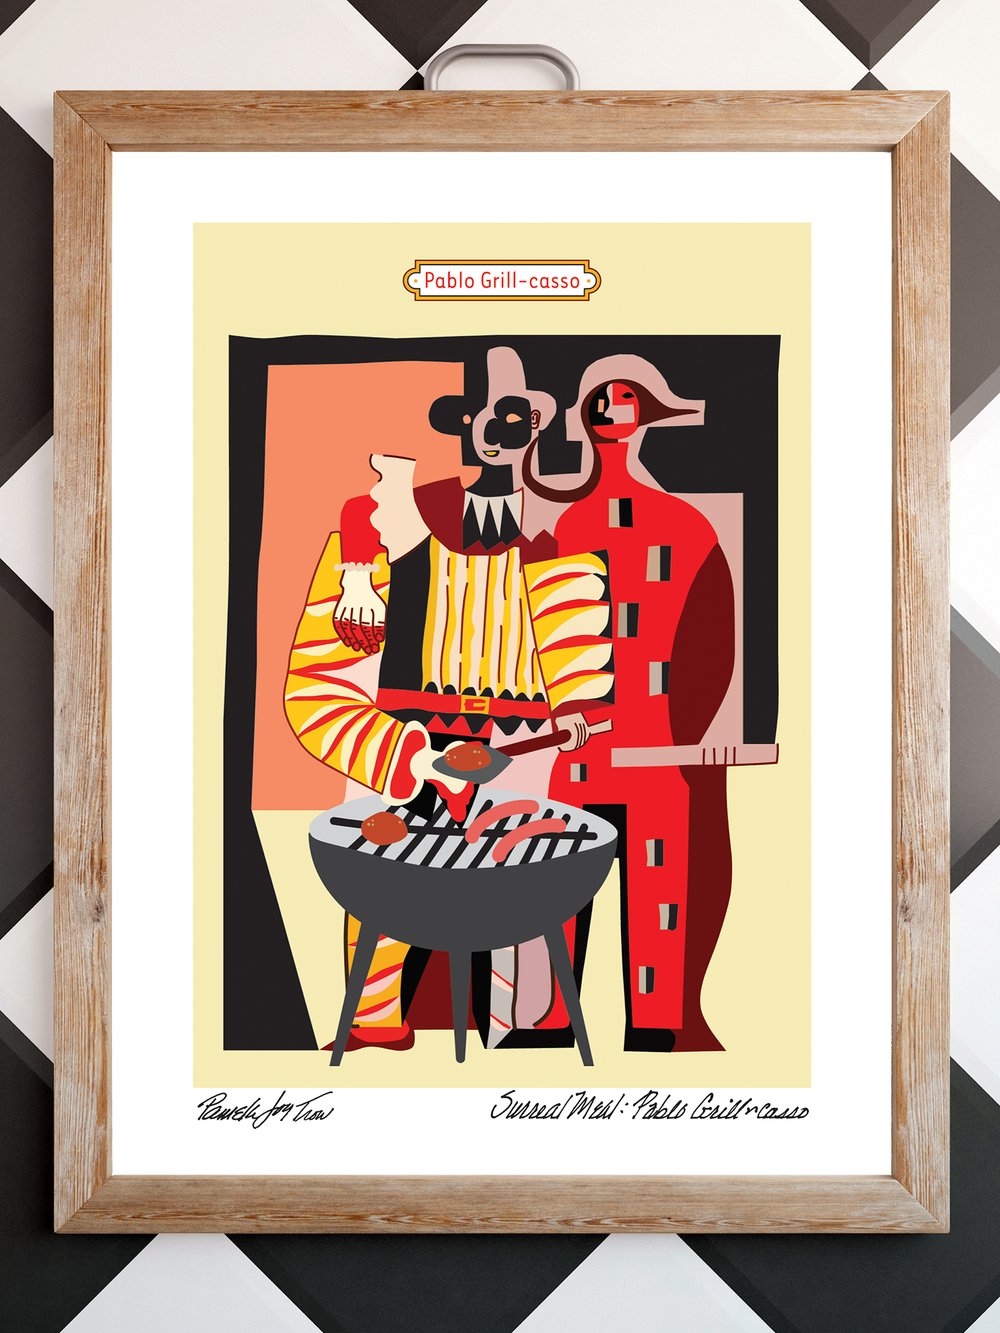 Surreal Meal: Pablo Grill-casso 8x10 Print Picasso Art — The Art of Joy Trow